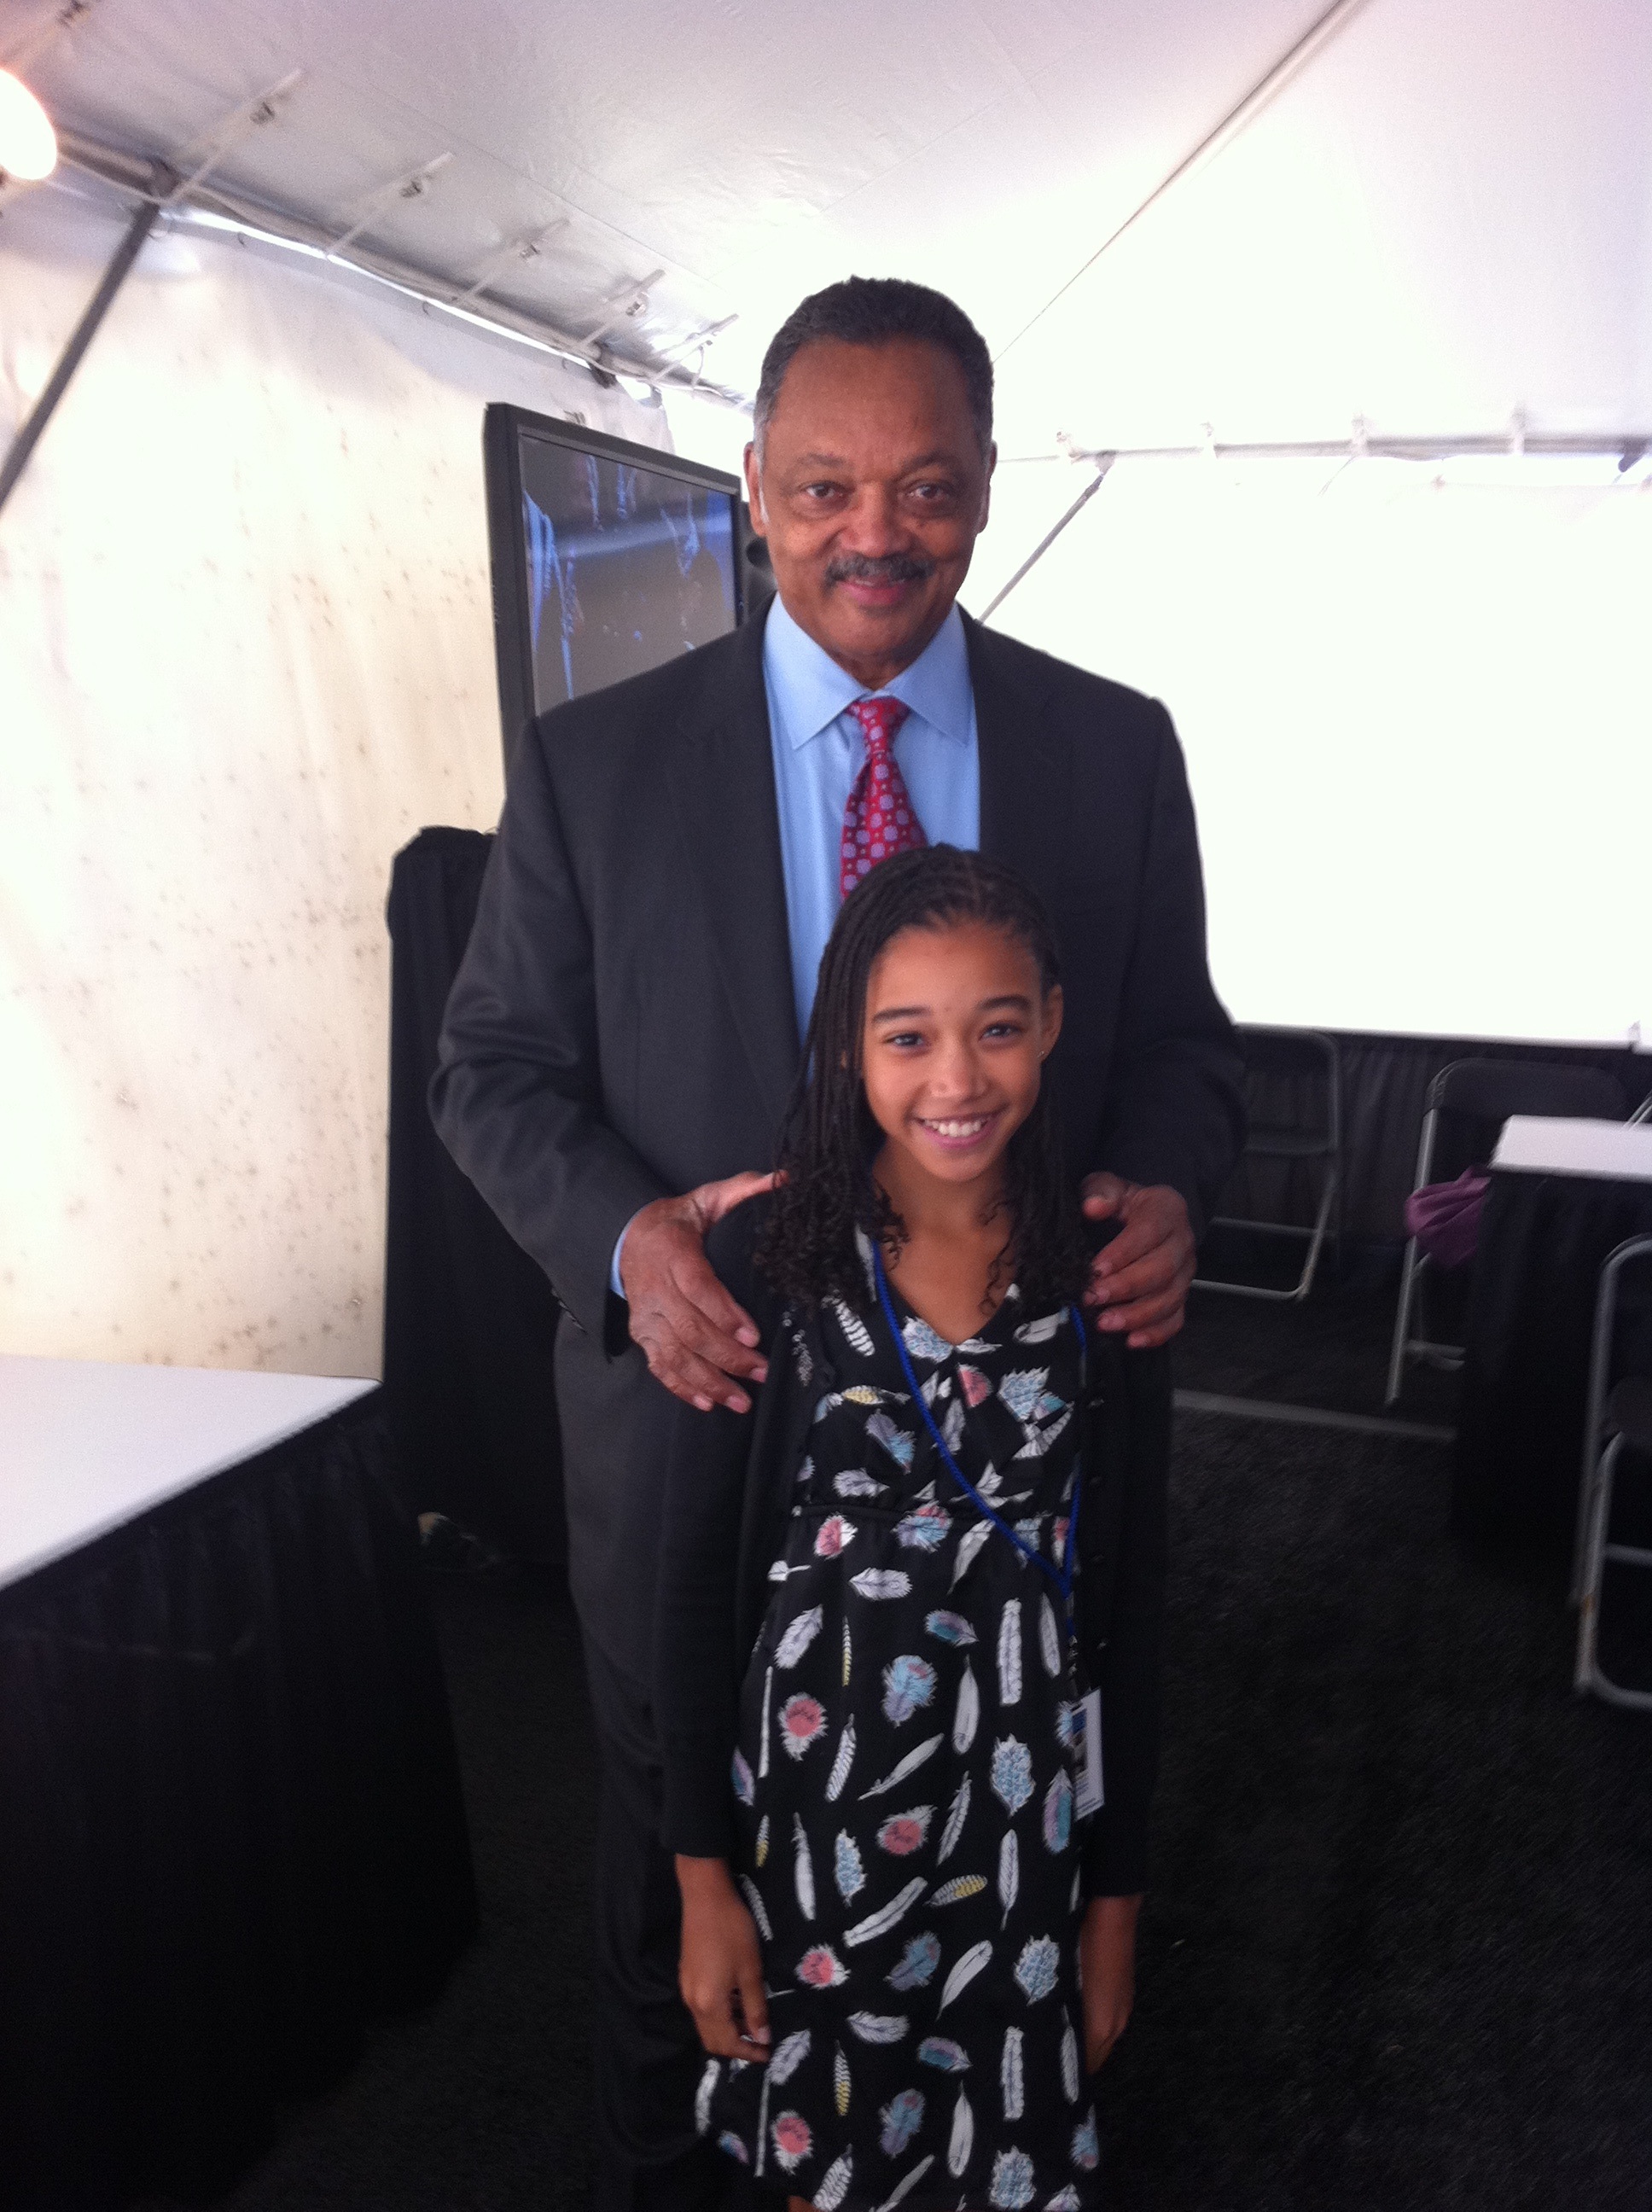 Amandla Stenberg and Jesse Jackson in the Green Room at the Martin Luther King, Jr. Memorial Dedication - October 16, 2011